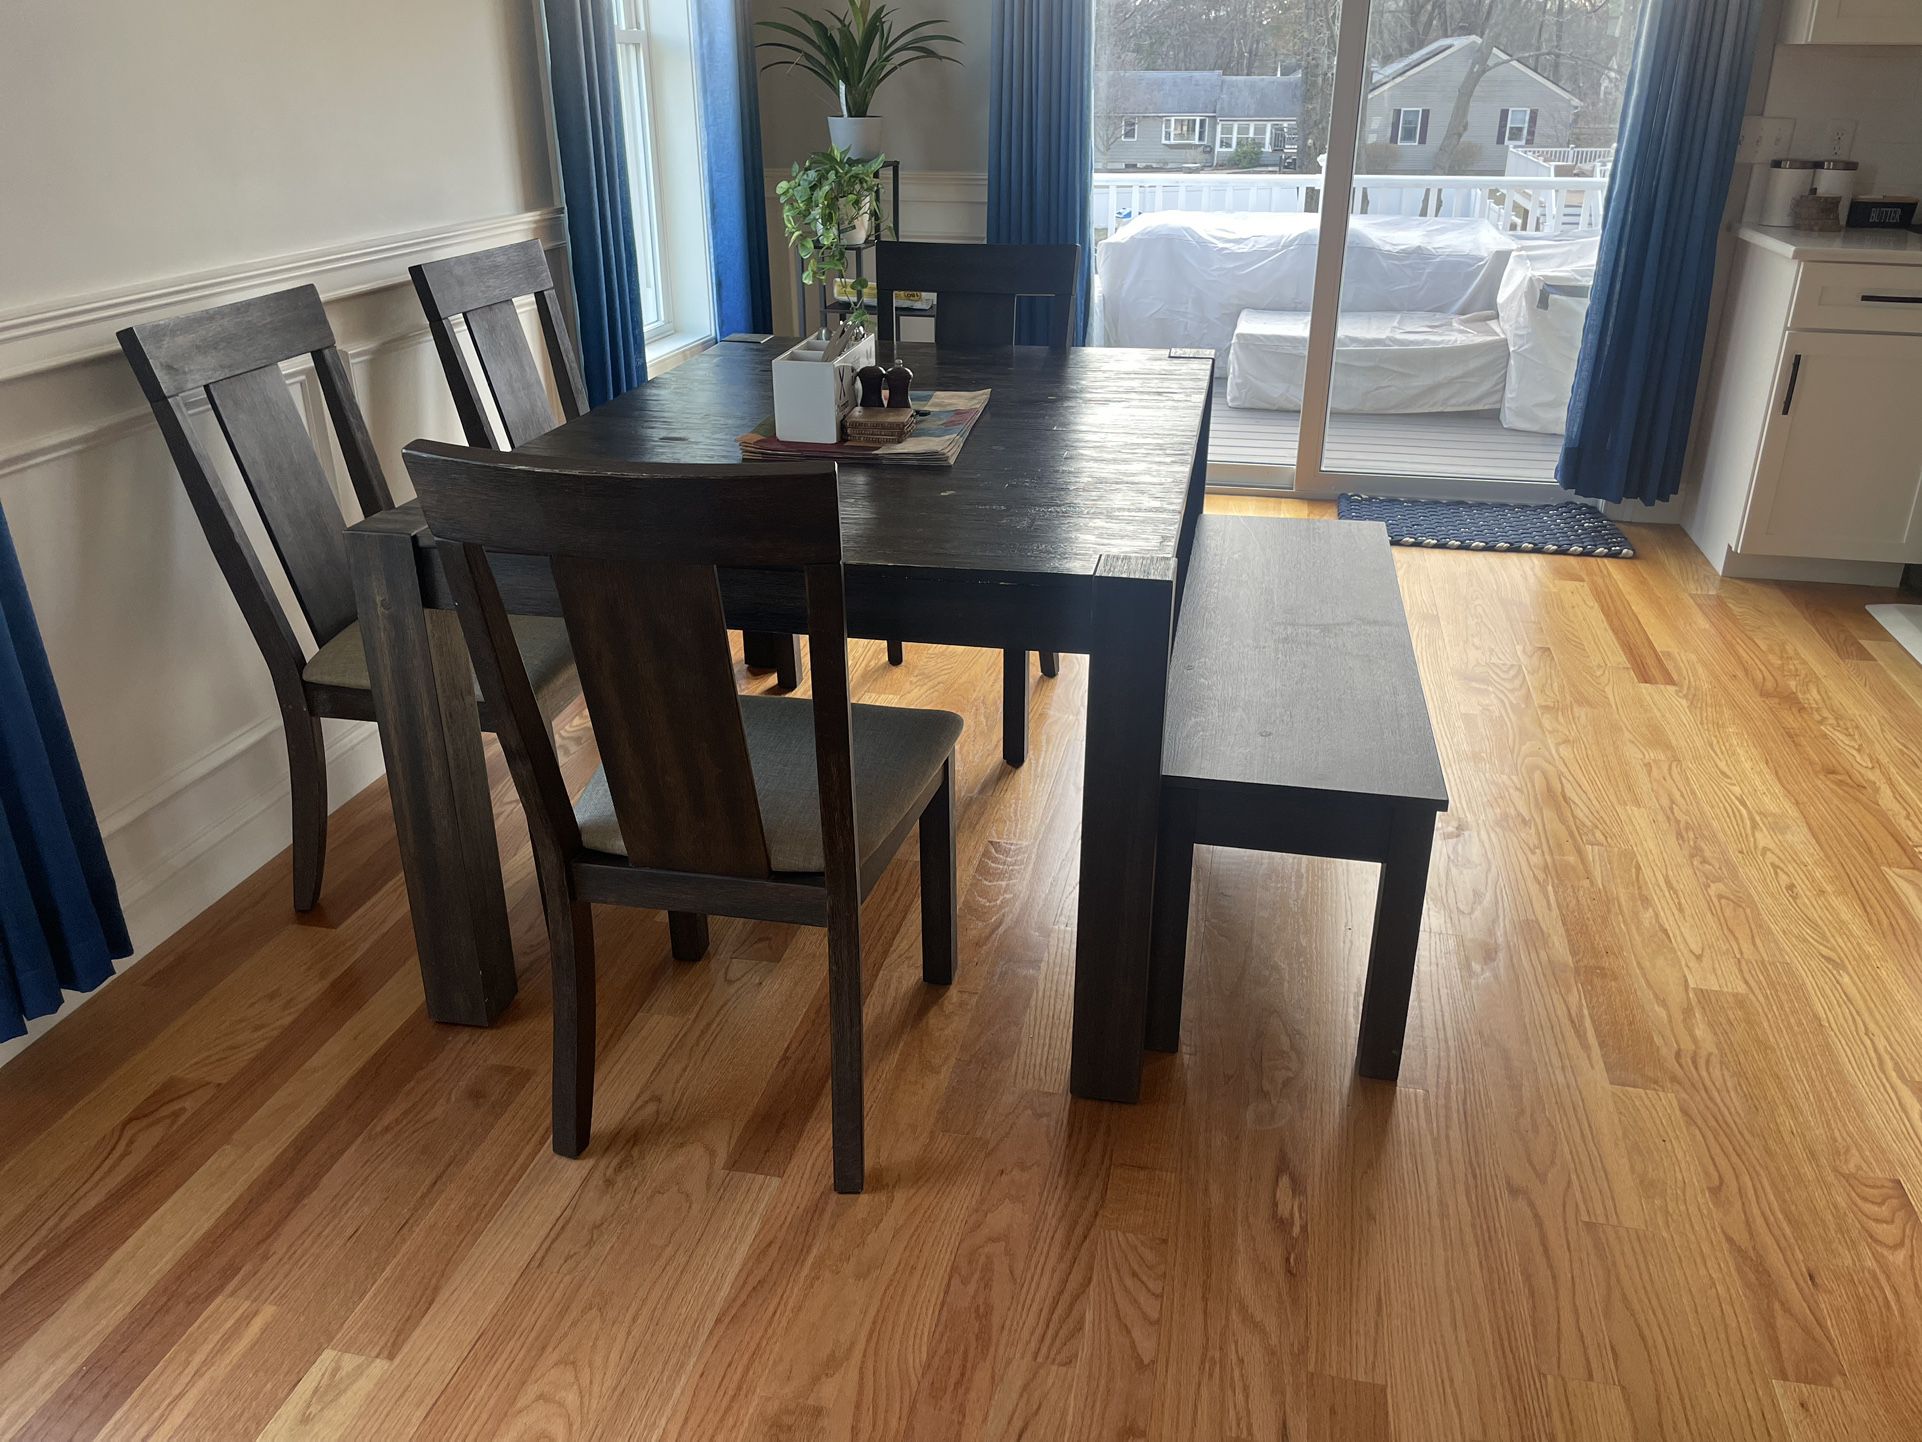 Wooden dining table with bench & extension